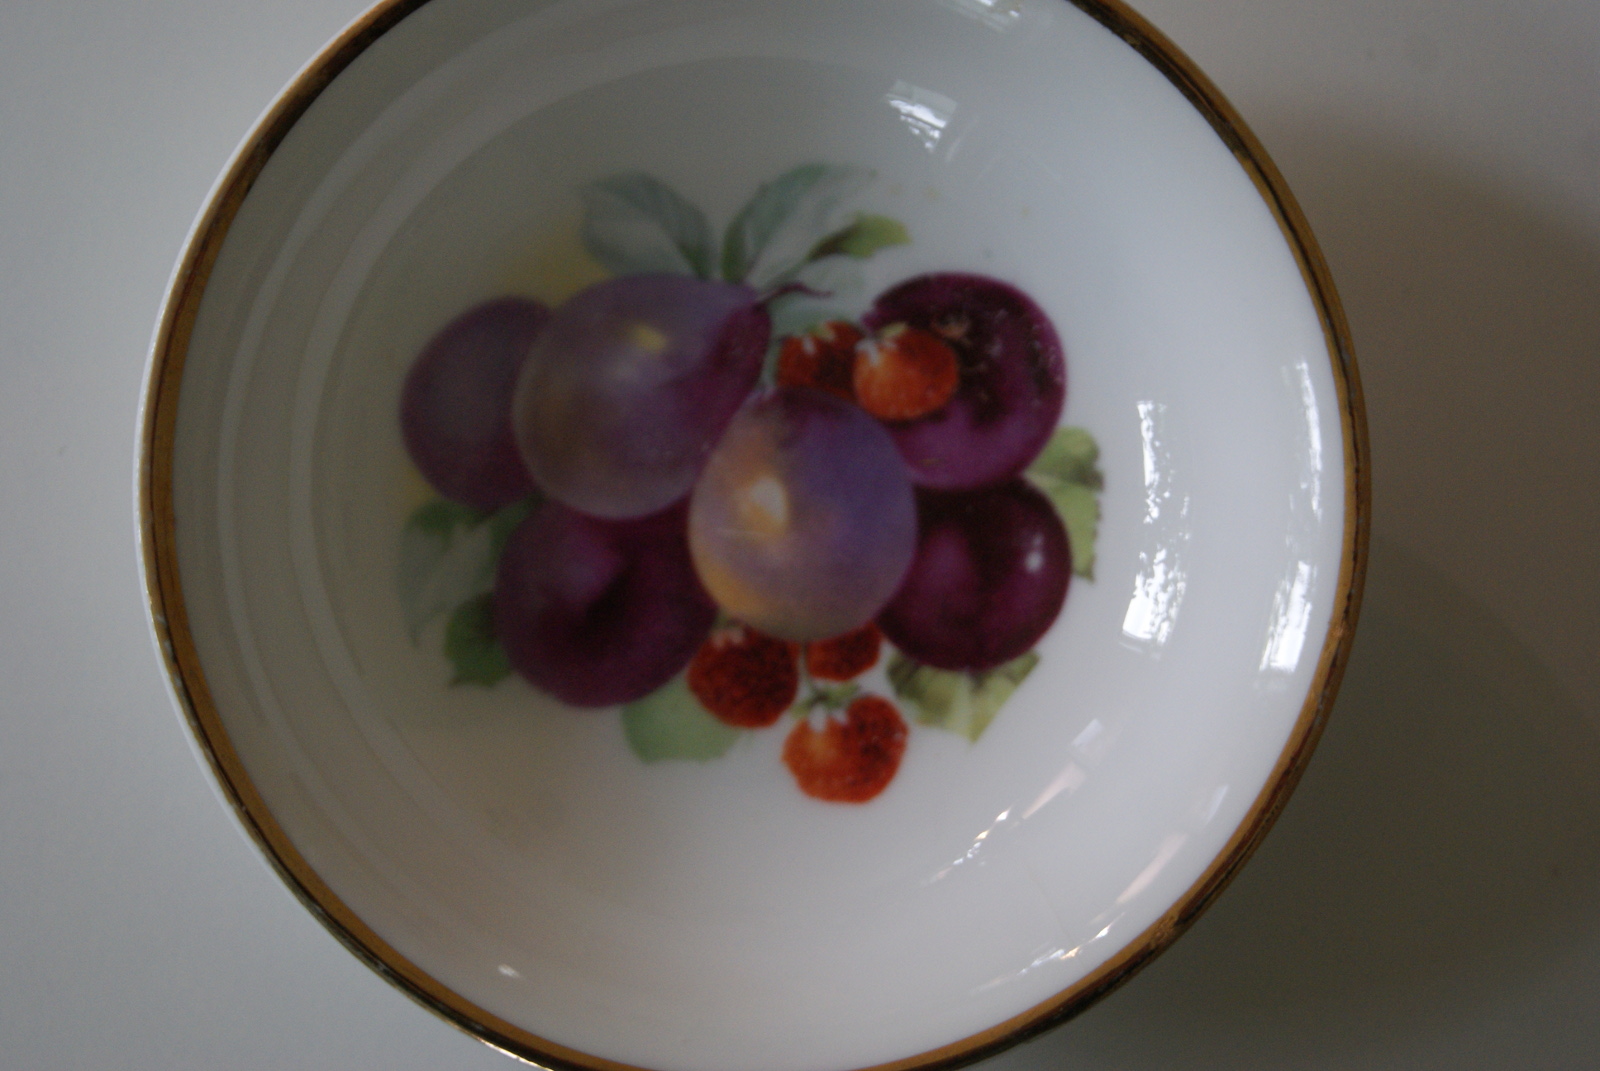 Porsgrund dessert bowl with fruits - plums and strawberries